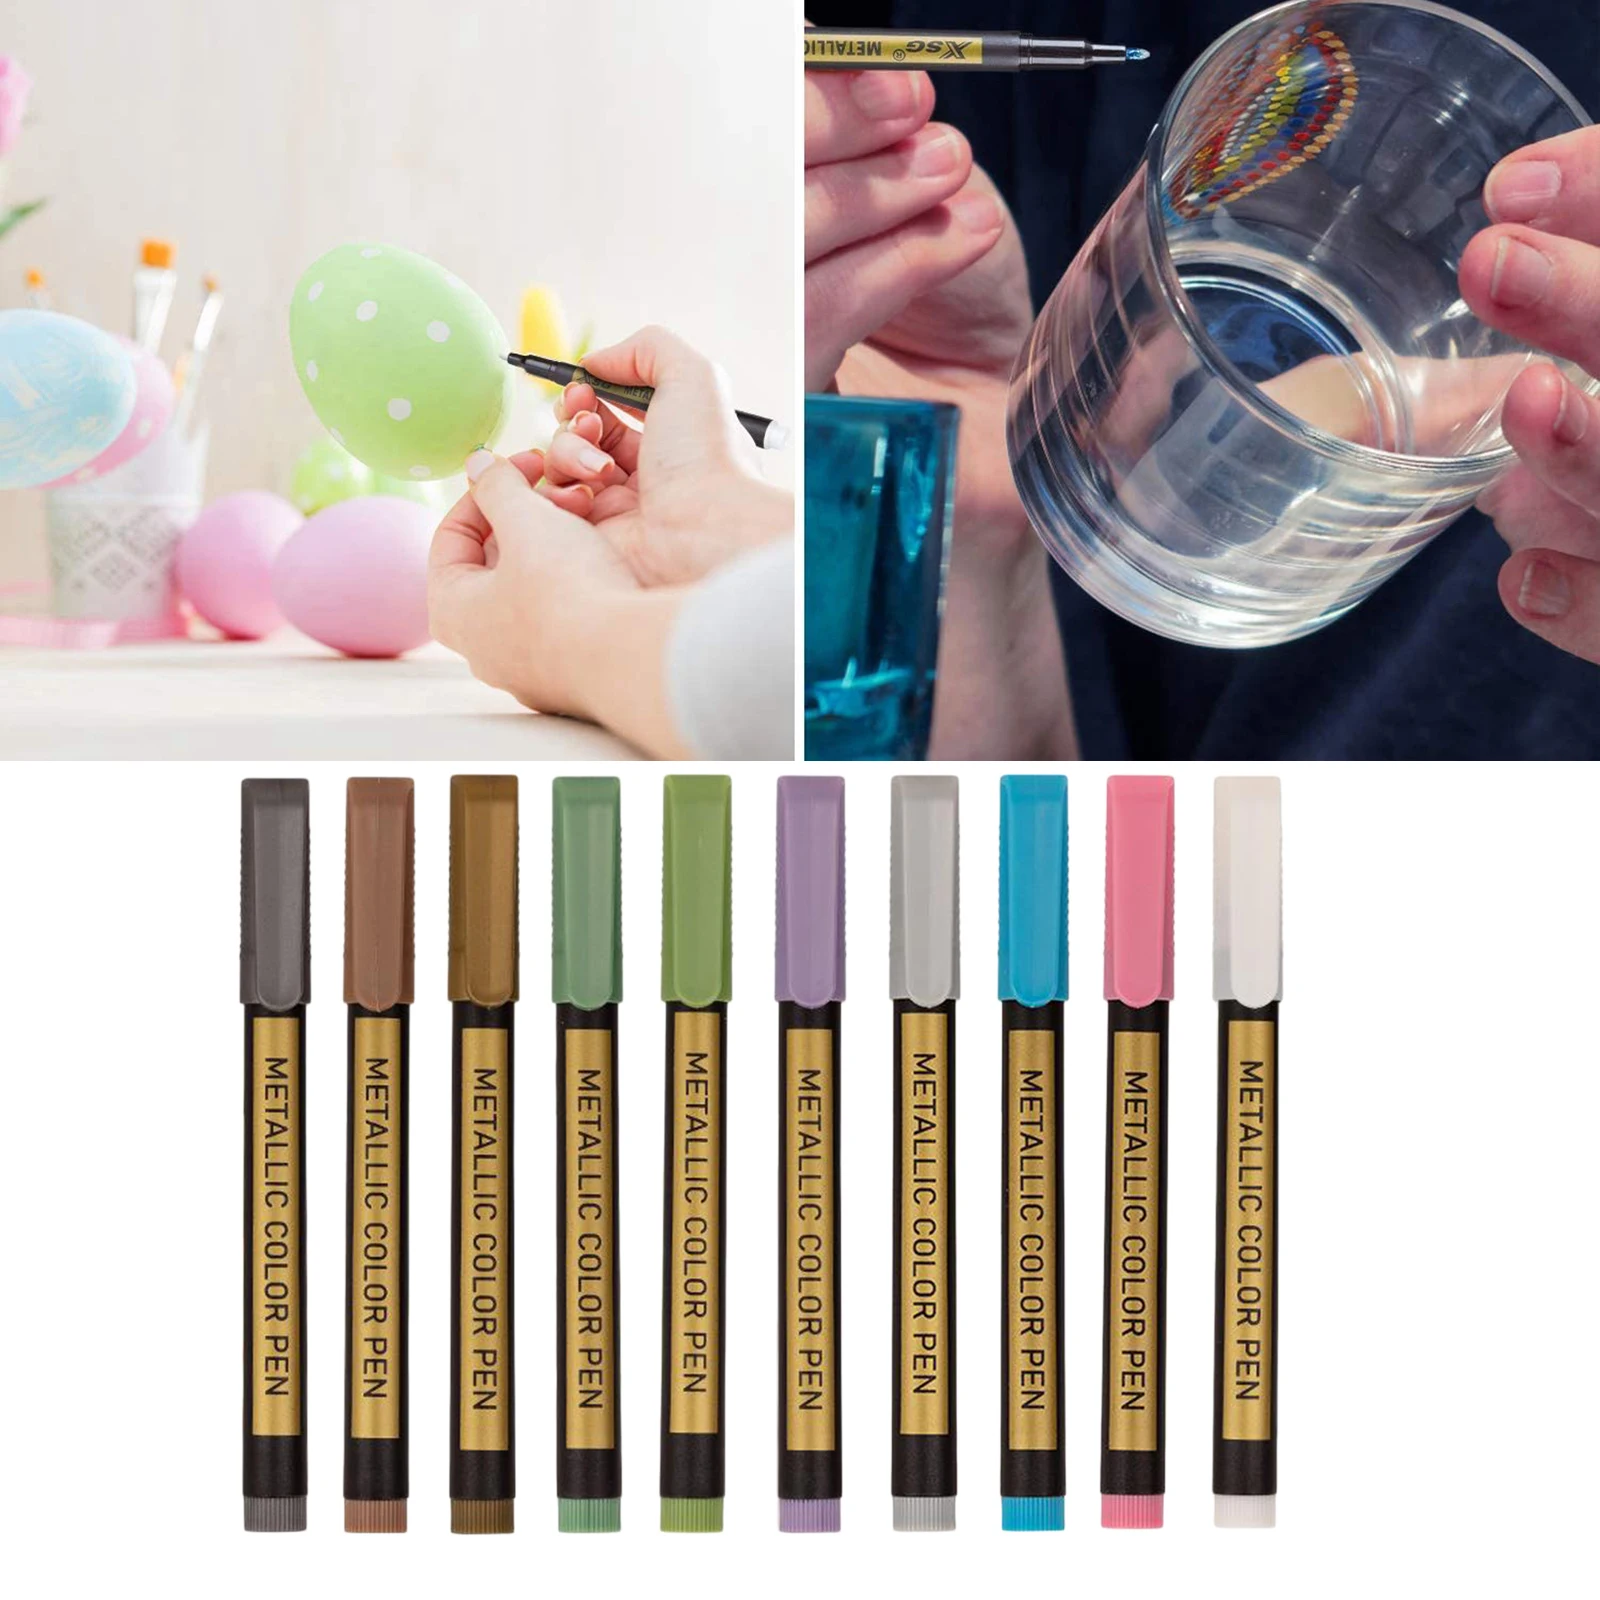 10lic Pens for Craft Art Markers for Wedding Guest Book,